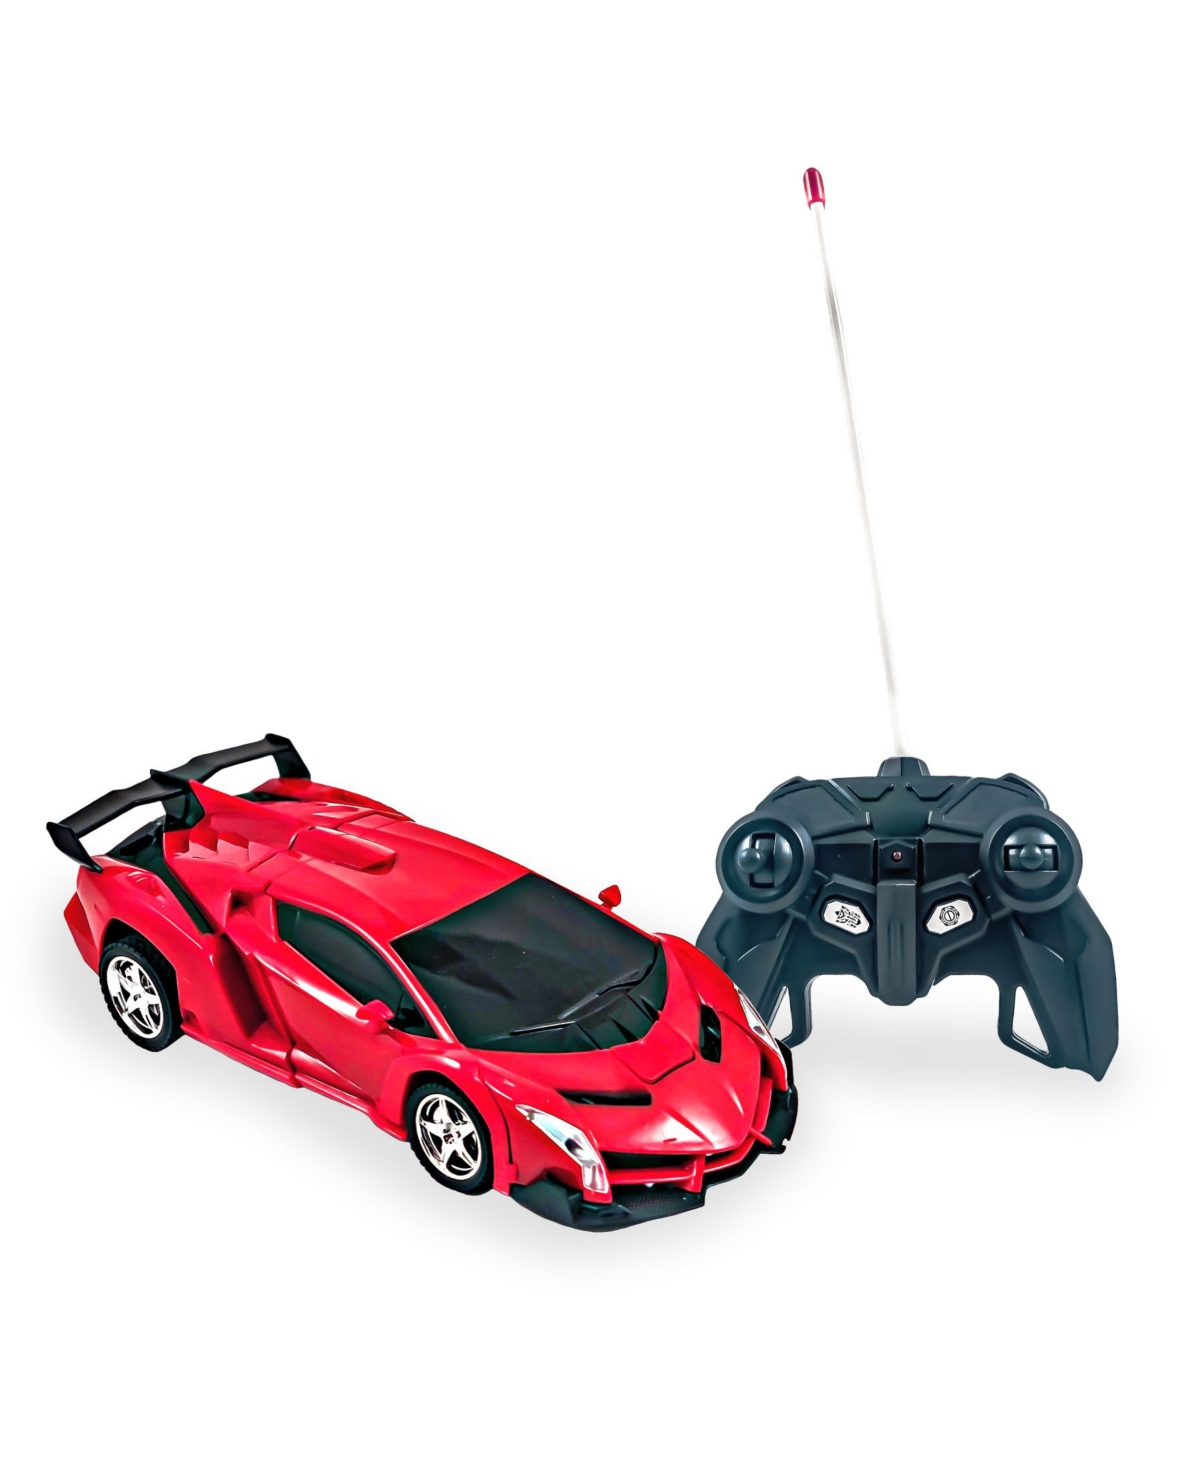 Flipo Automotion Shape-shifting Robot R/c Car In Red